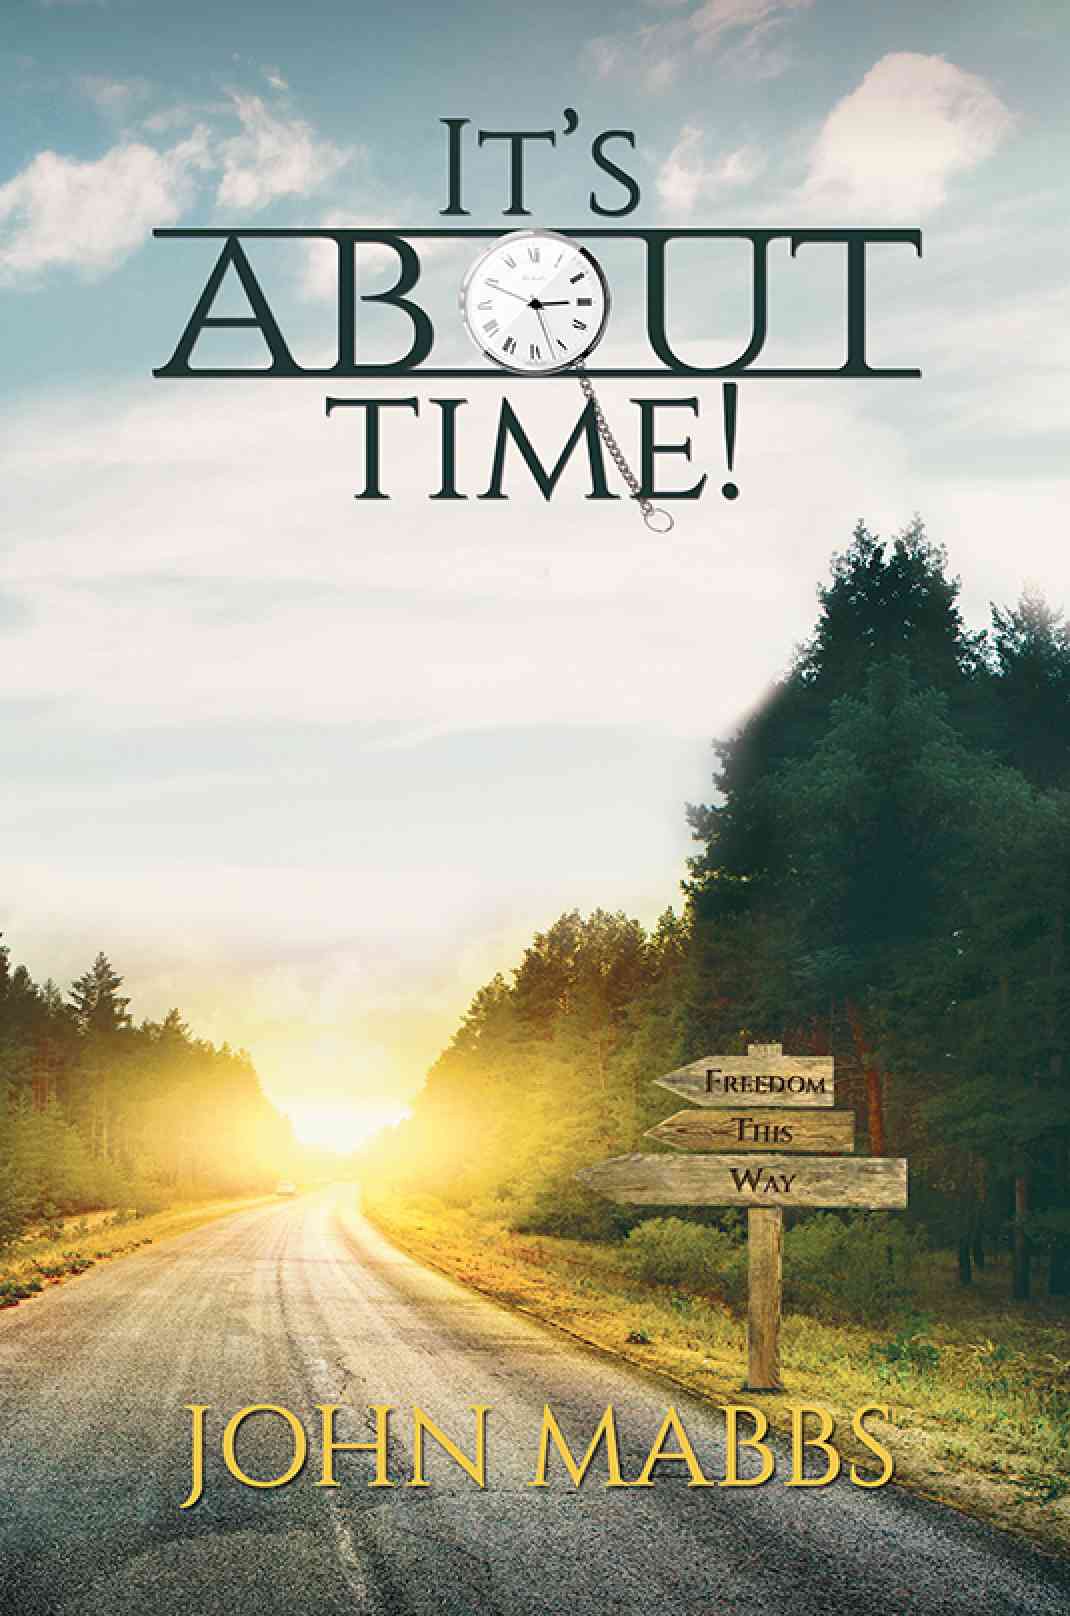 ‘It's About Time!’ by John Mabbs Reviewed on Travel blogger’s website